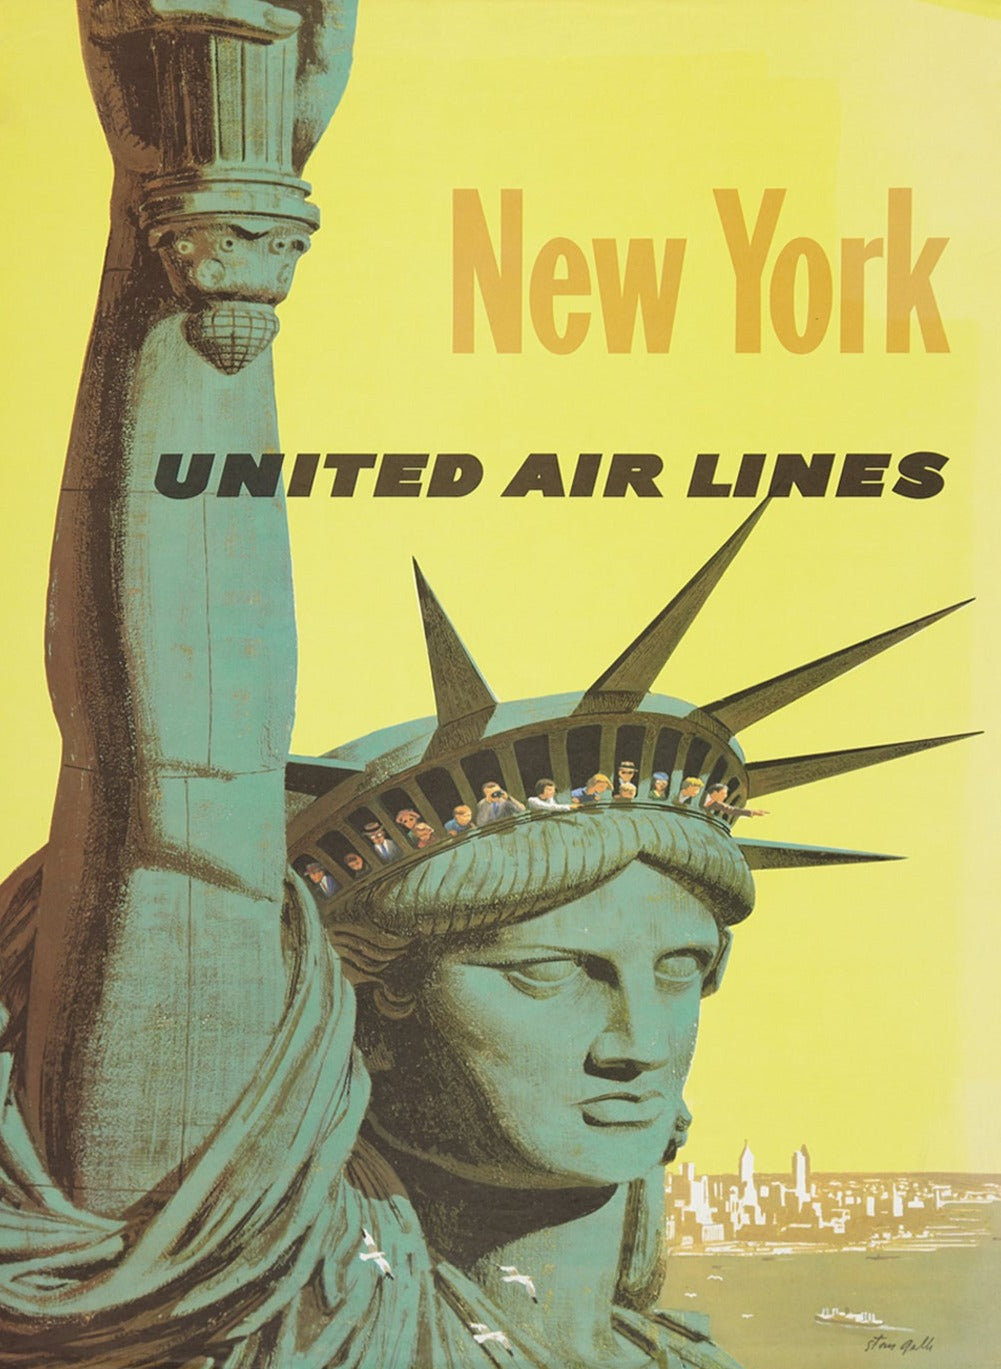 United Airlines - New York